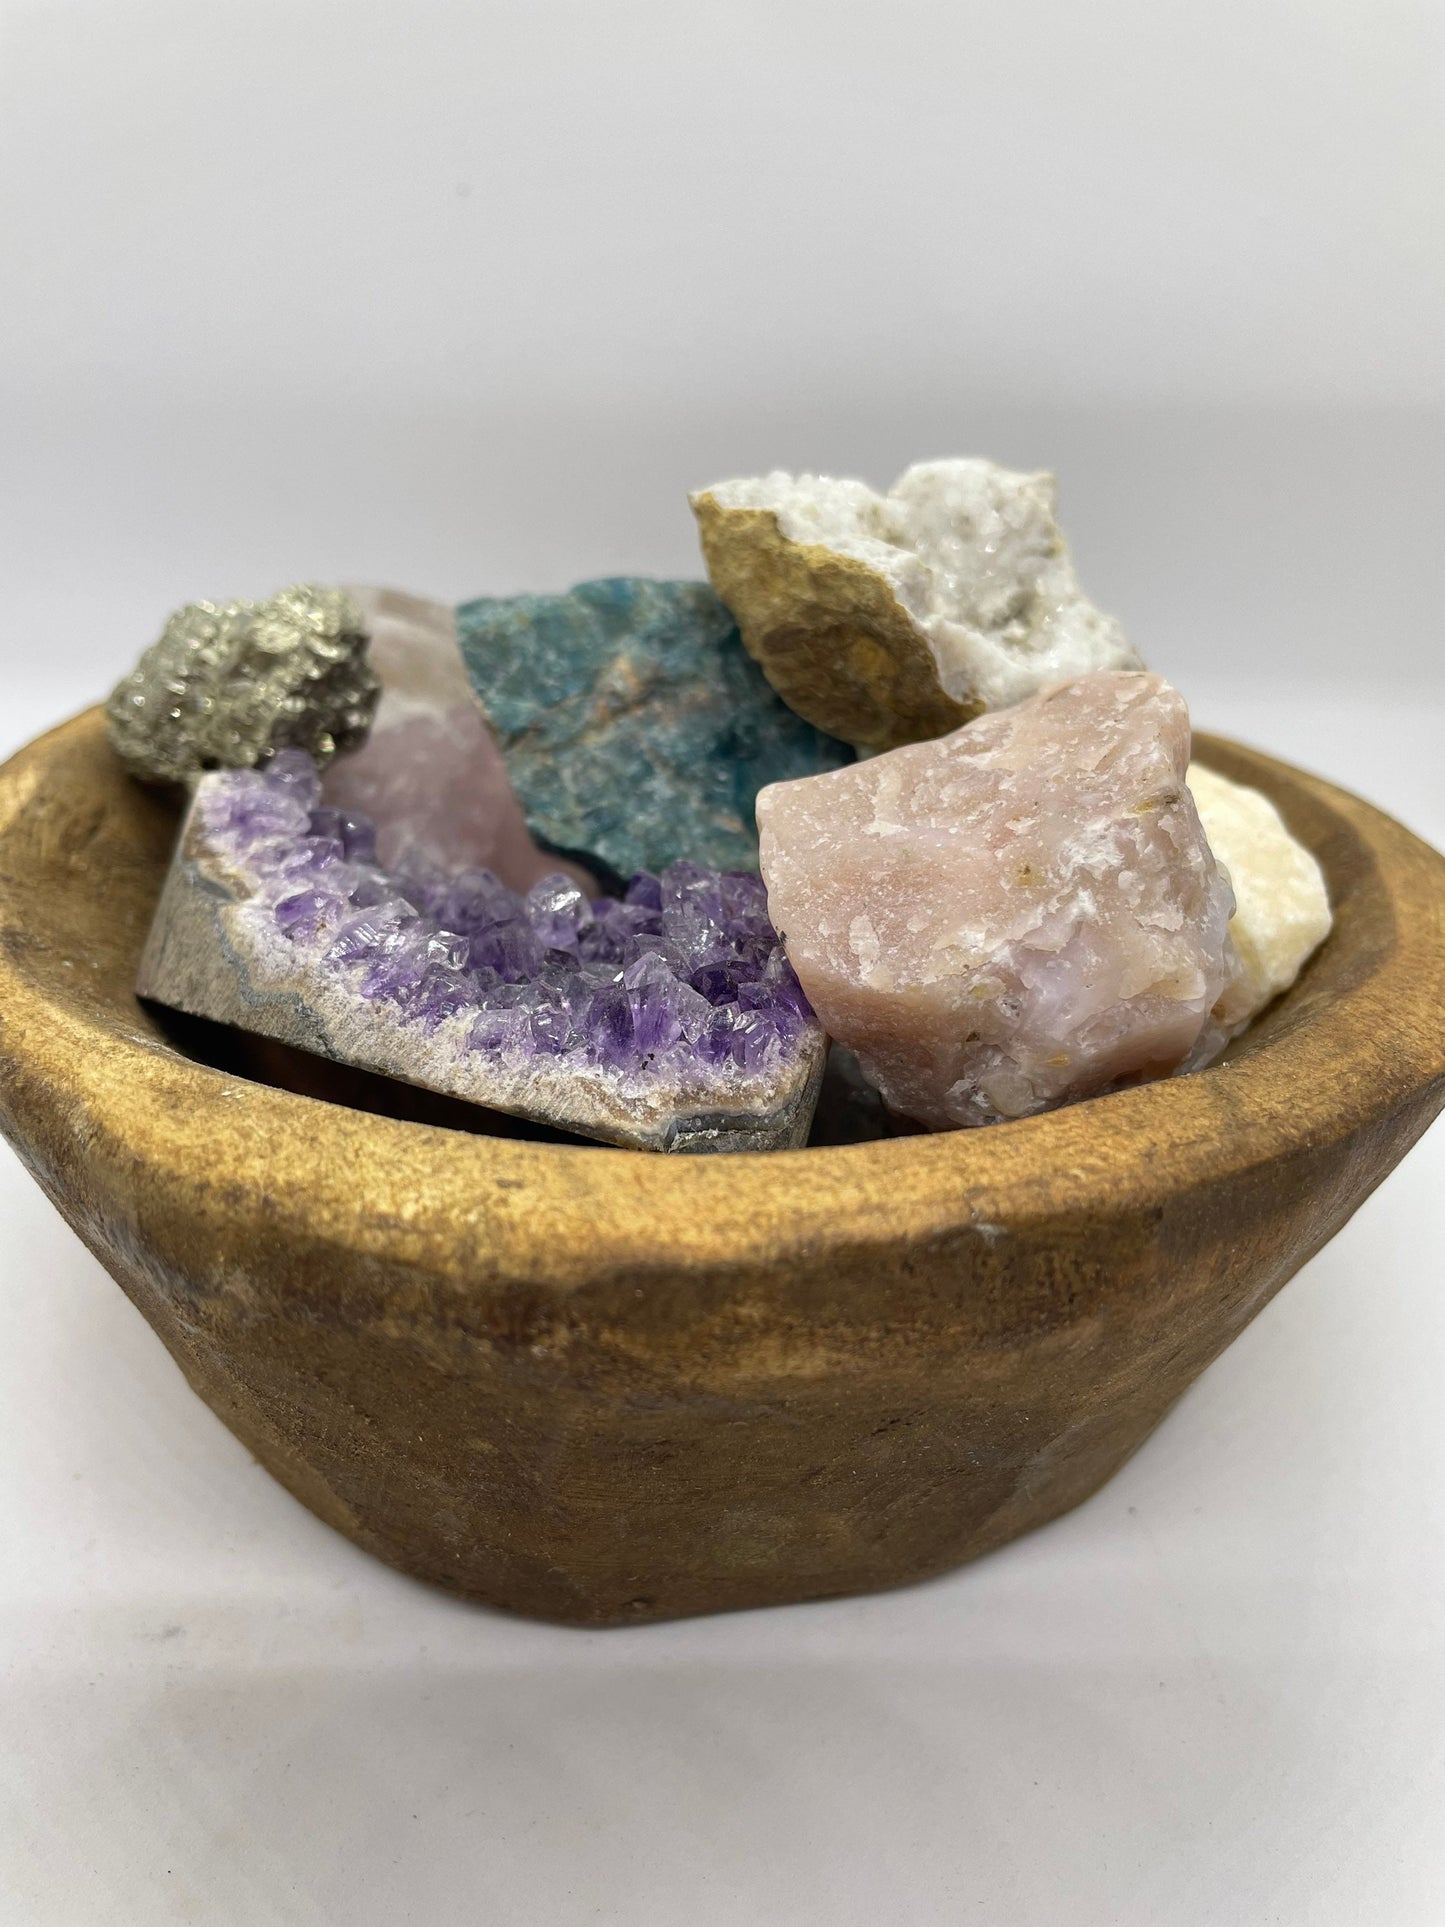 Gemstone Gift Set, Raw Crystals Gift Box, Boho Wedding Decor, Calming Office Decor, Desk Accessories for Women, Rocks and Geodes, Home Gifts